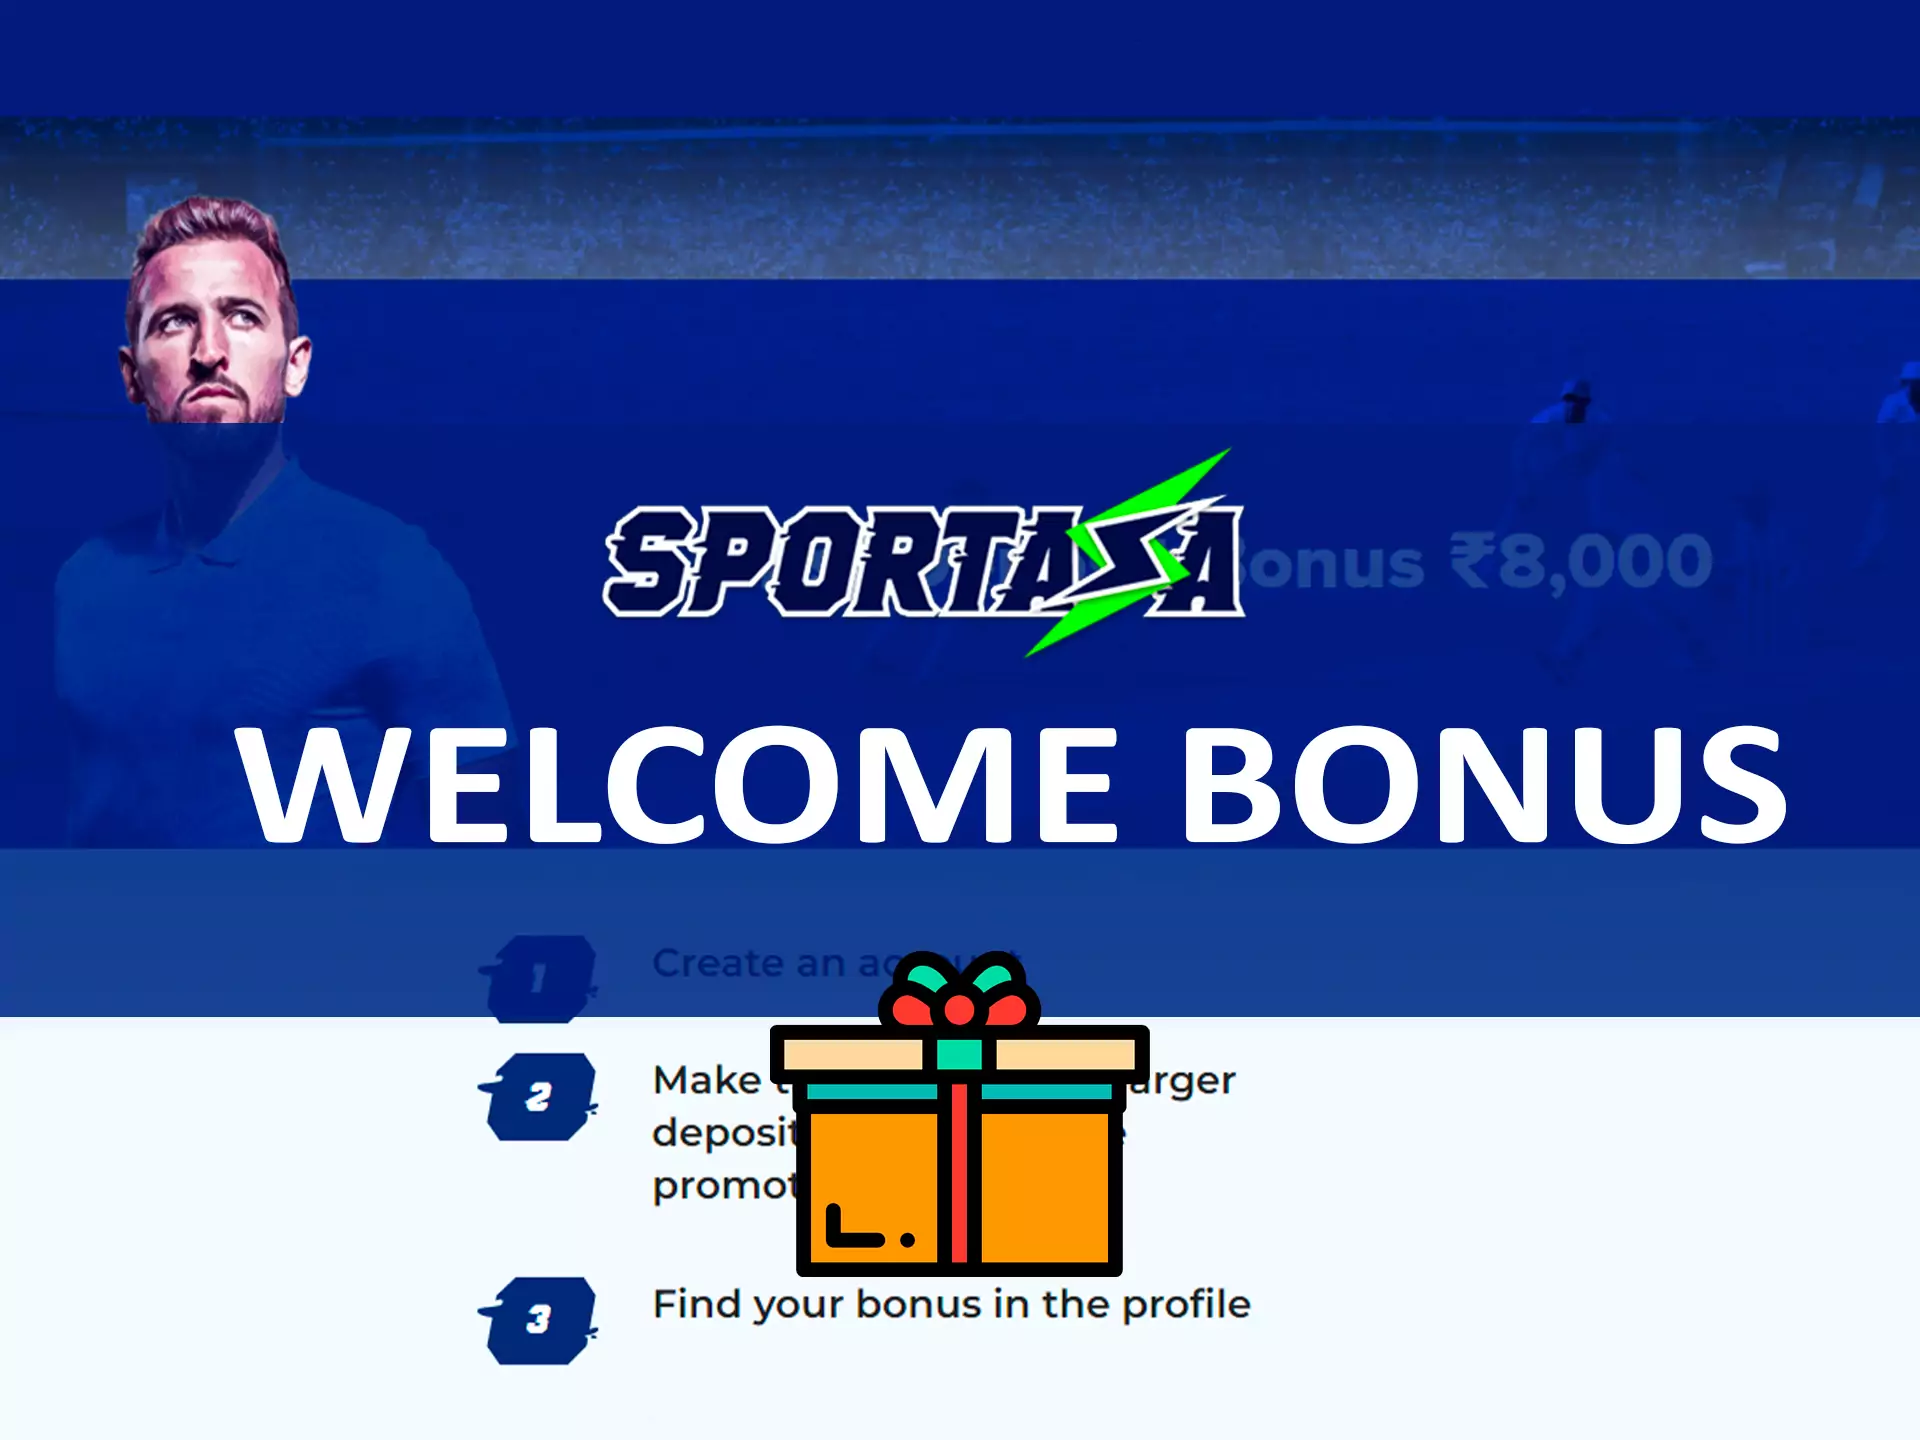 Sportaza offers a welcome bonus for new users.